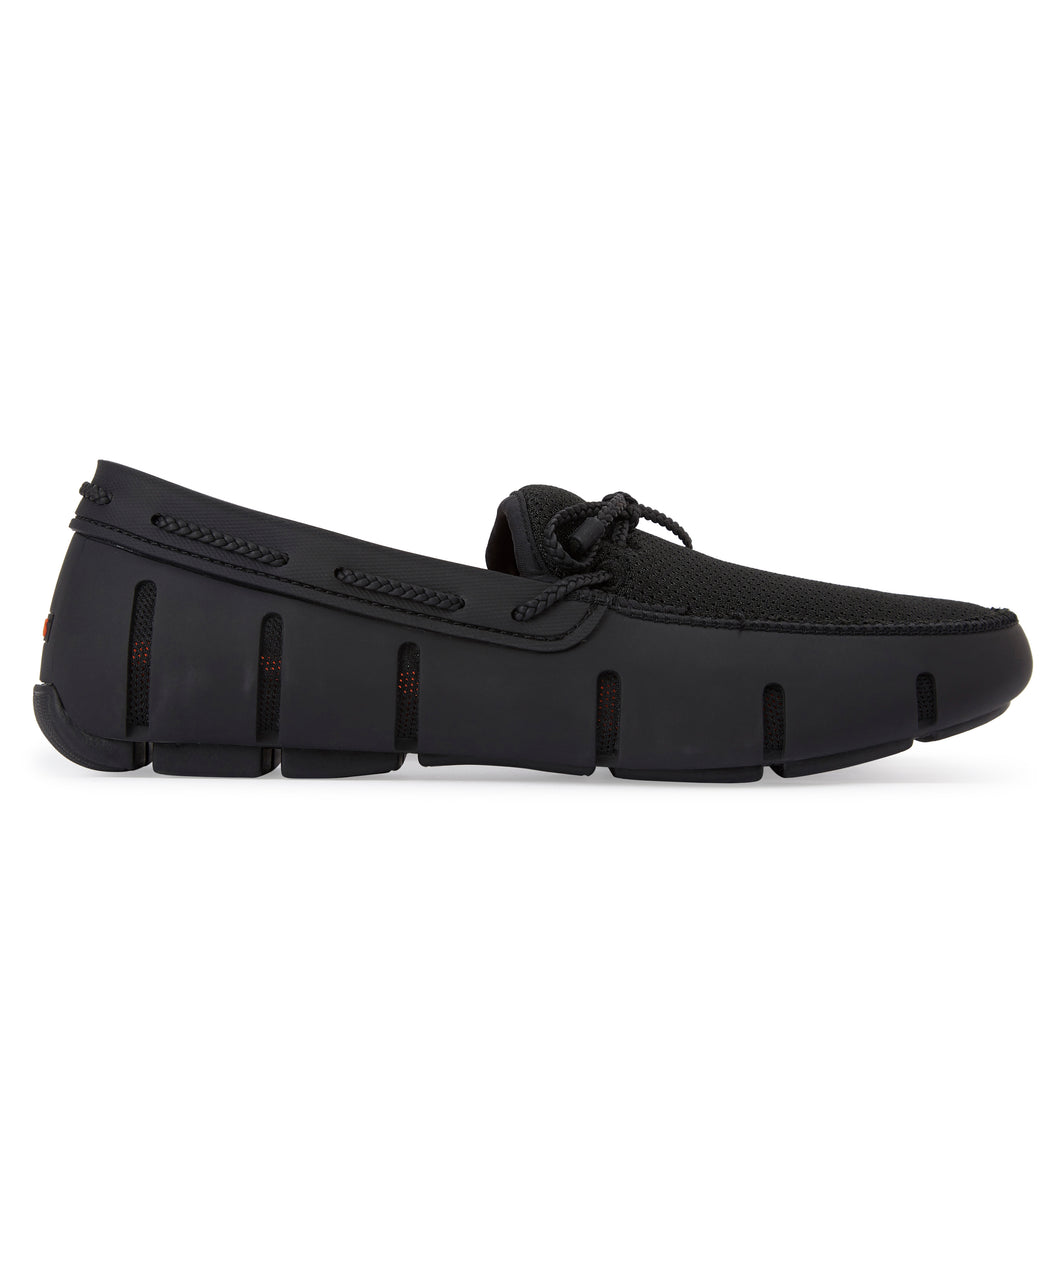 Swims Braided Lace Loafer Black